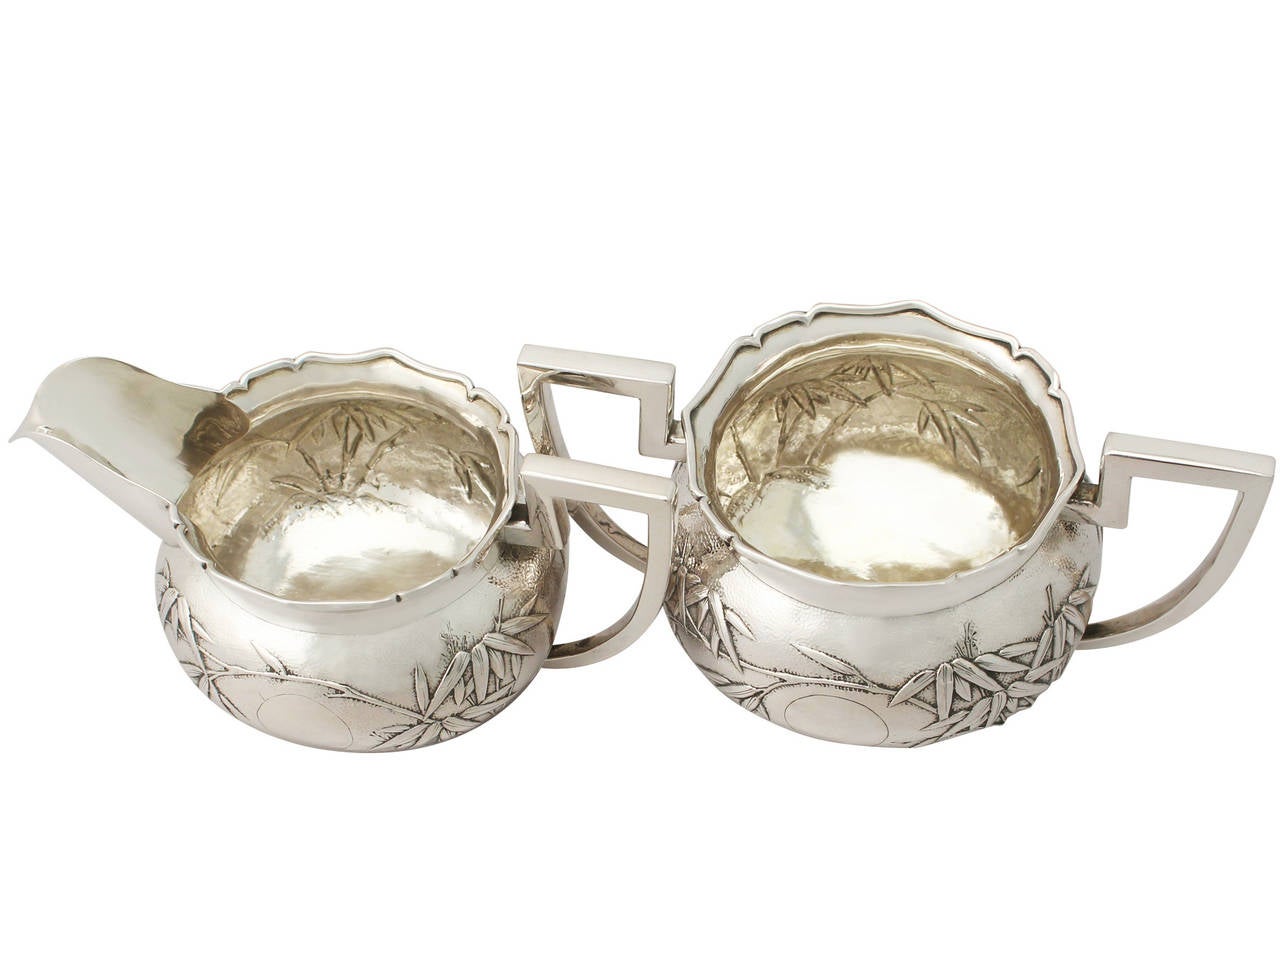 Antique Chinese Export Silver Cream Jug / Creamer and Sugar Bowl For Sale 4